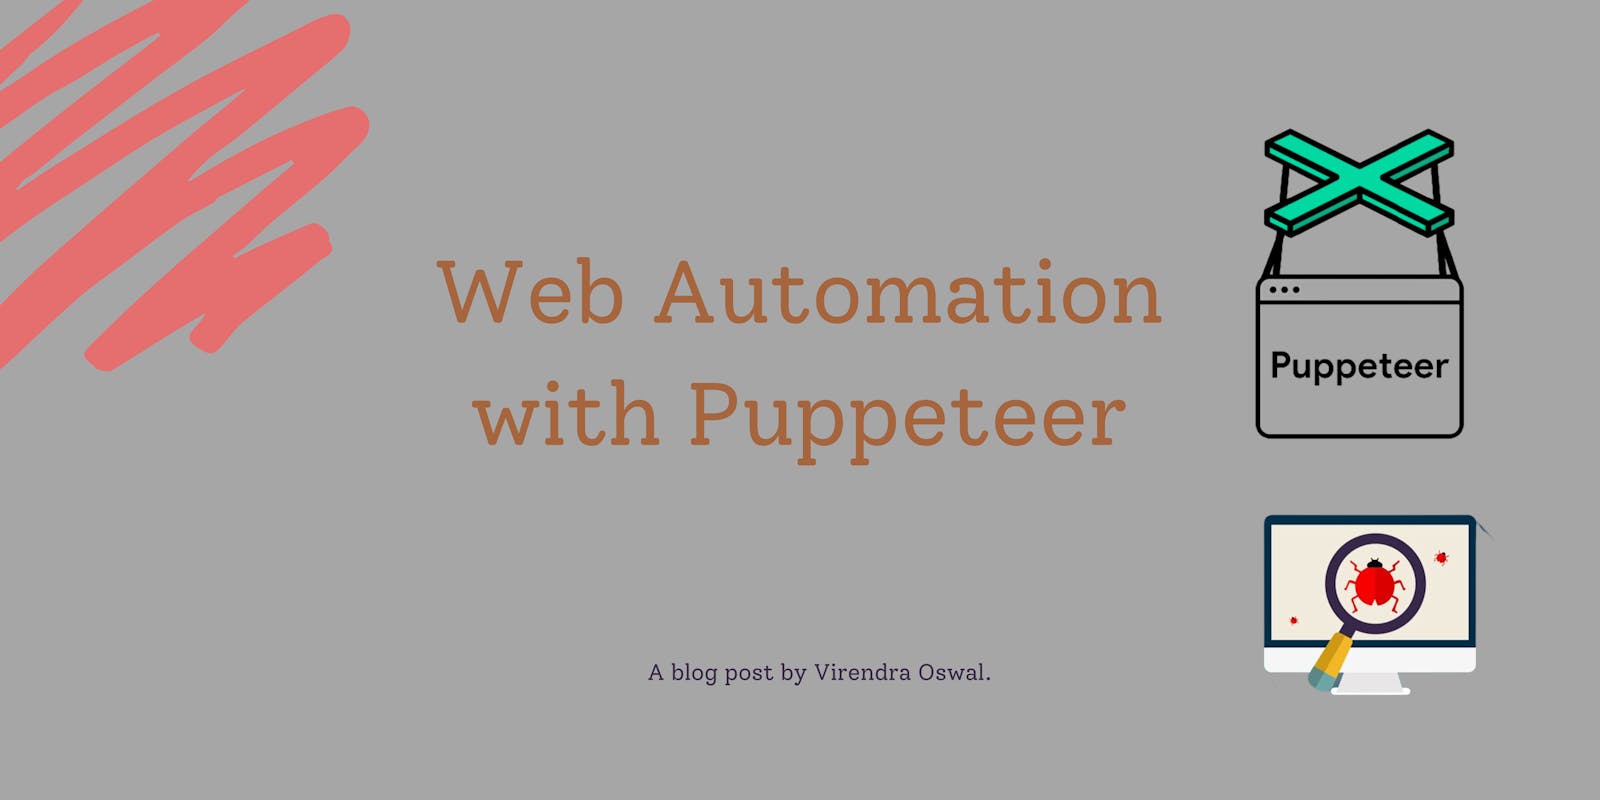 Web Automation using Puppeteer